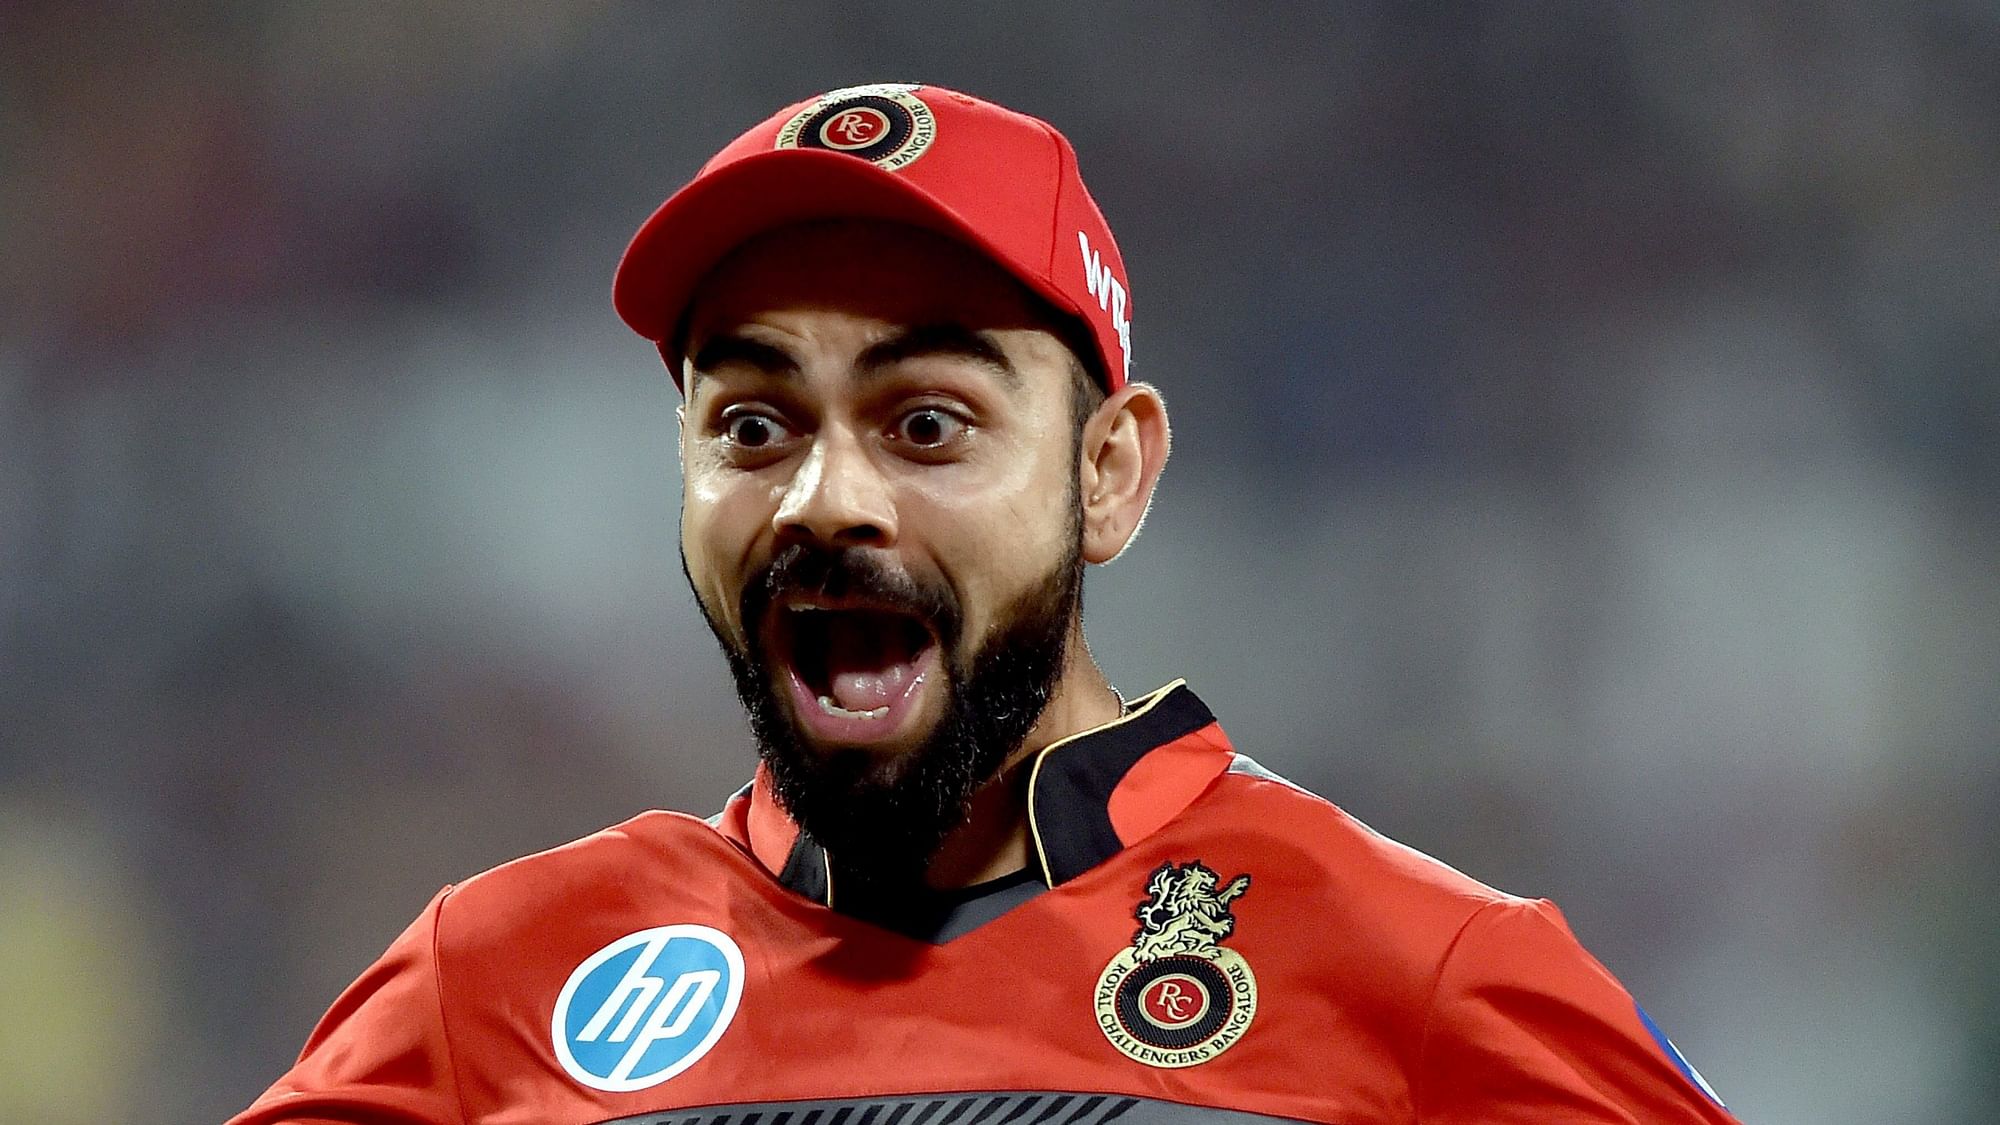 Despite playing all the seasons of IPL so far and reaching three finals, Virat Kohli’s RCB are yet to win a title.